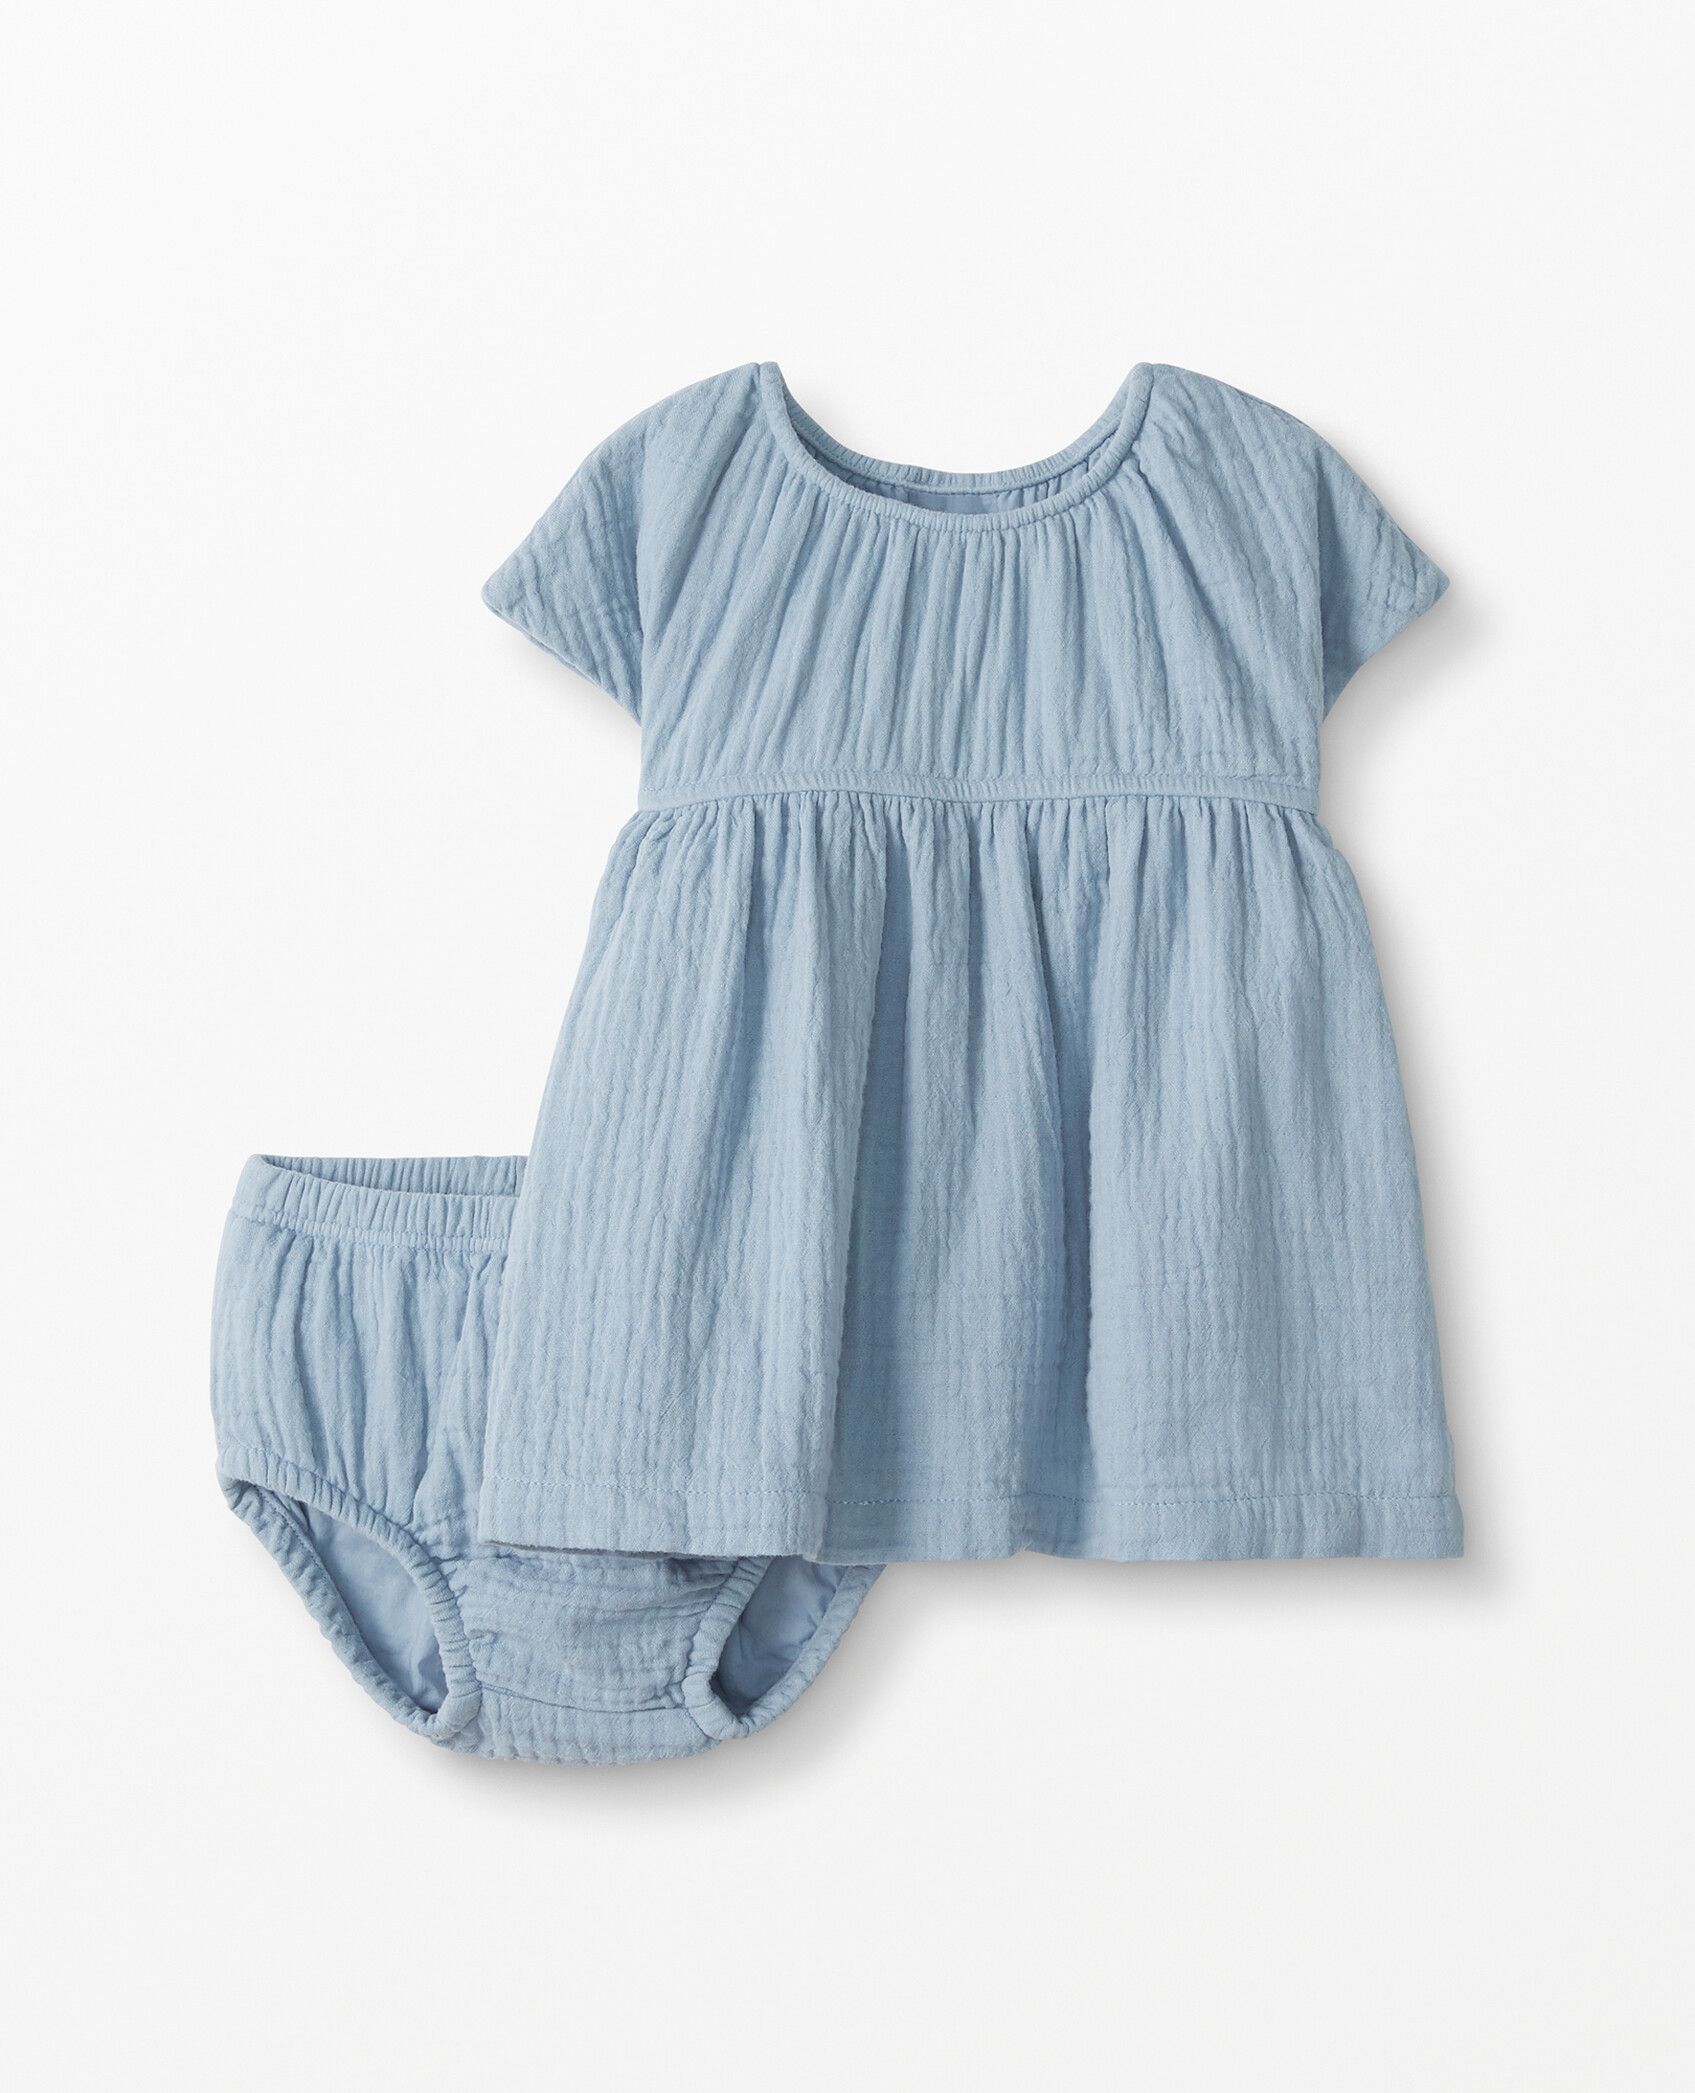 Bubbly Woven Dress Set | Hanna Andersson